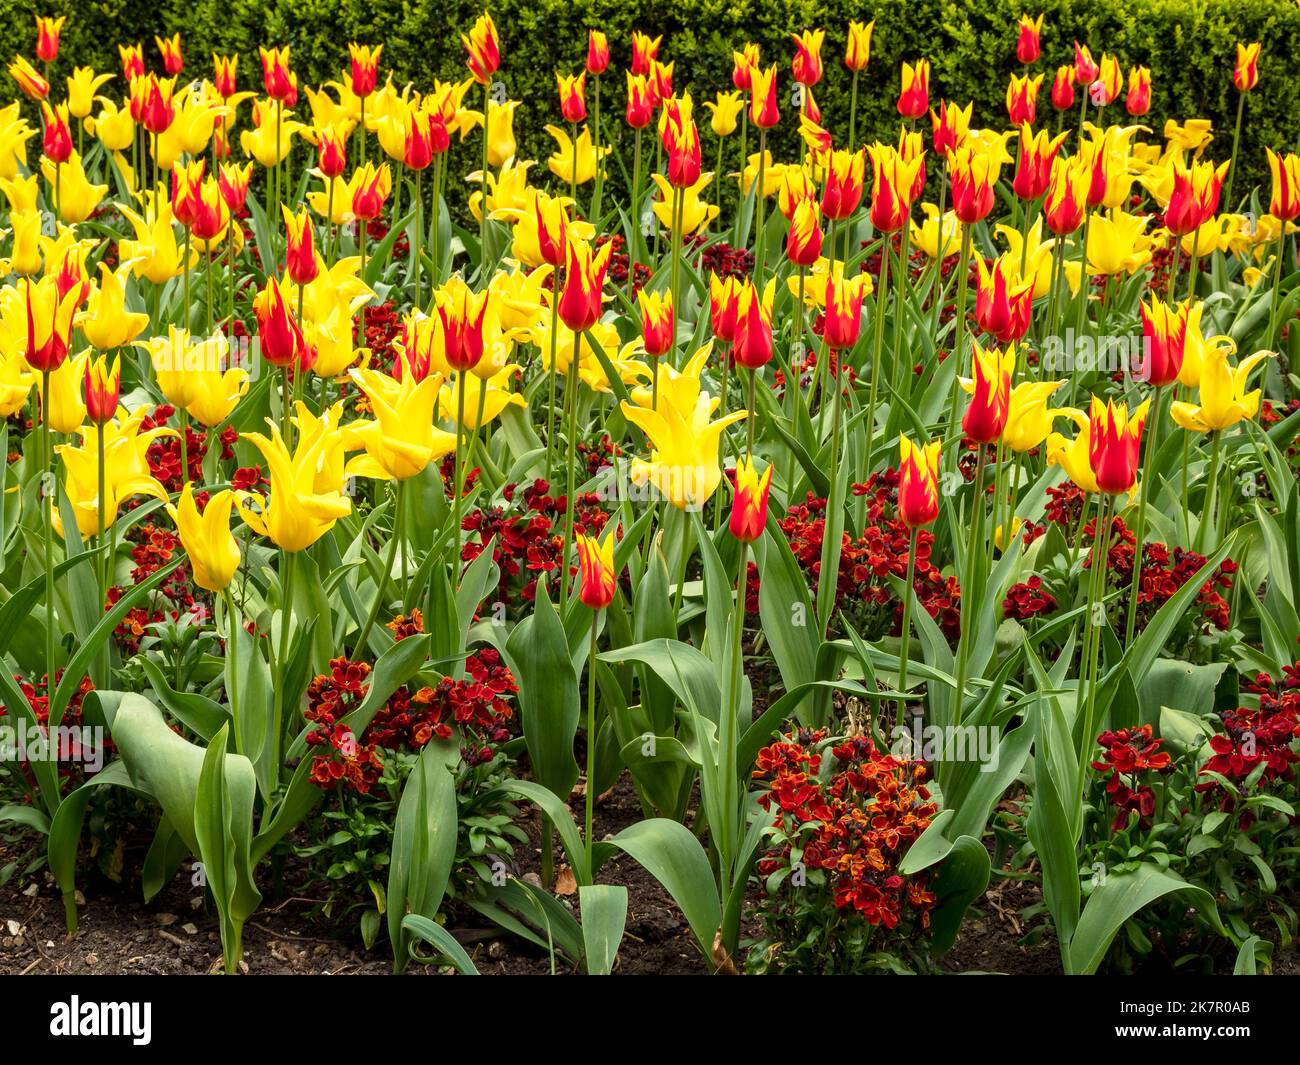 Colourful garden flowerbed containing mixed tulips and wallflowers Stock Photo